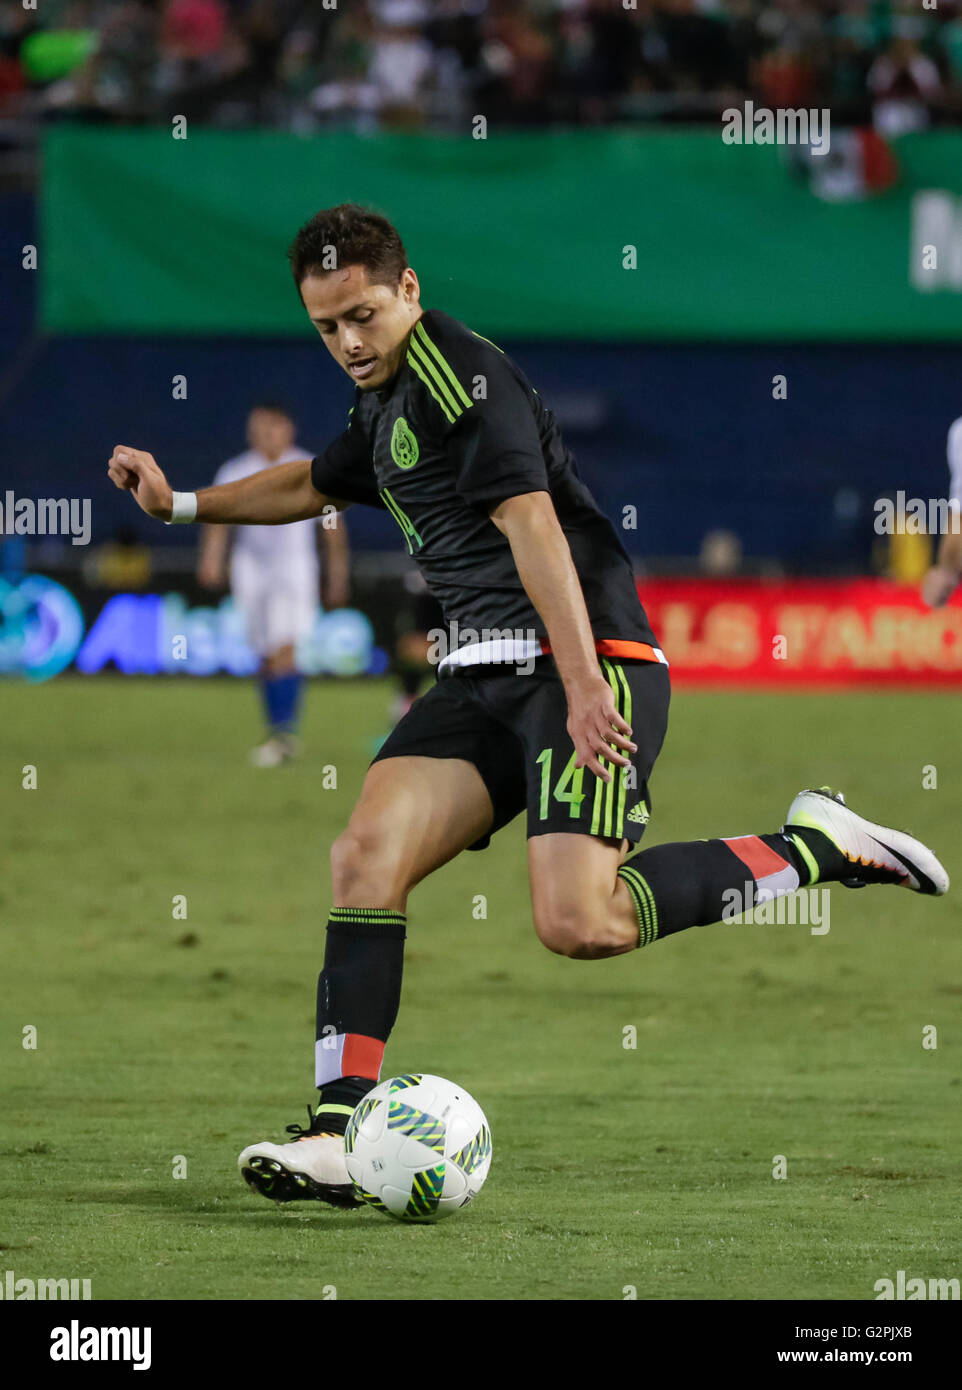 San Diego, California, USA. 01st June, 2016. Mexican Forward #14 Javier ''Chicharito'' Hernandez during an international soccer match between Mexico and Chile at Qualcomm Stadium in San Diego, California. Mexico defeats Chile 1-0. Justin Cooper/CSM/Alamy Live News Stock Photo